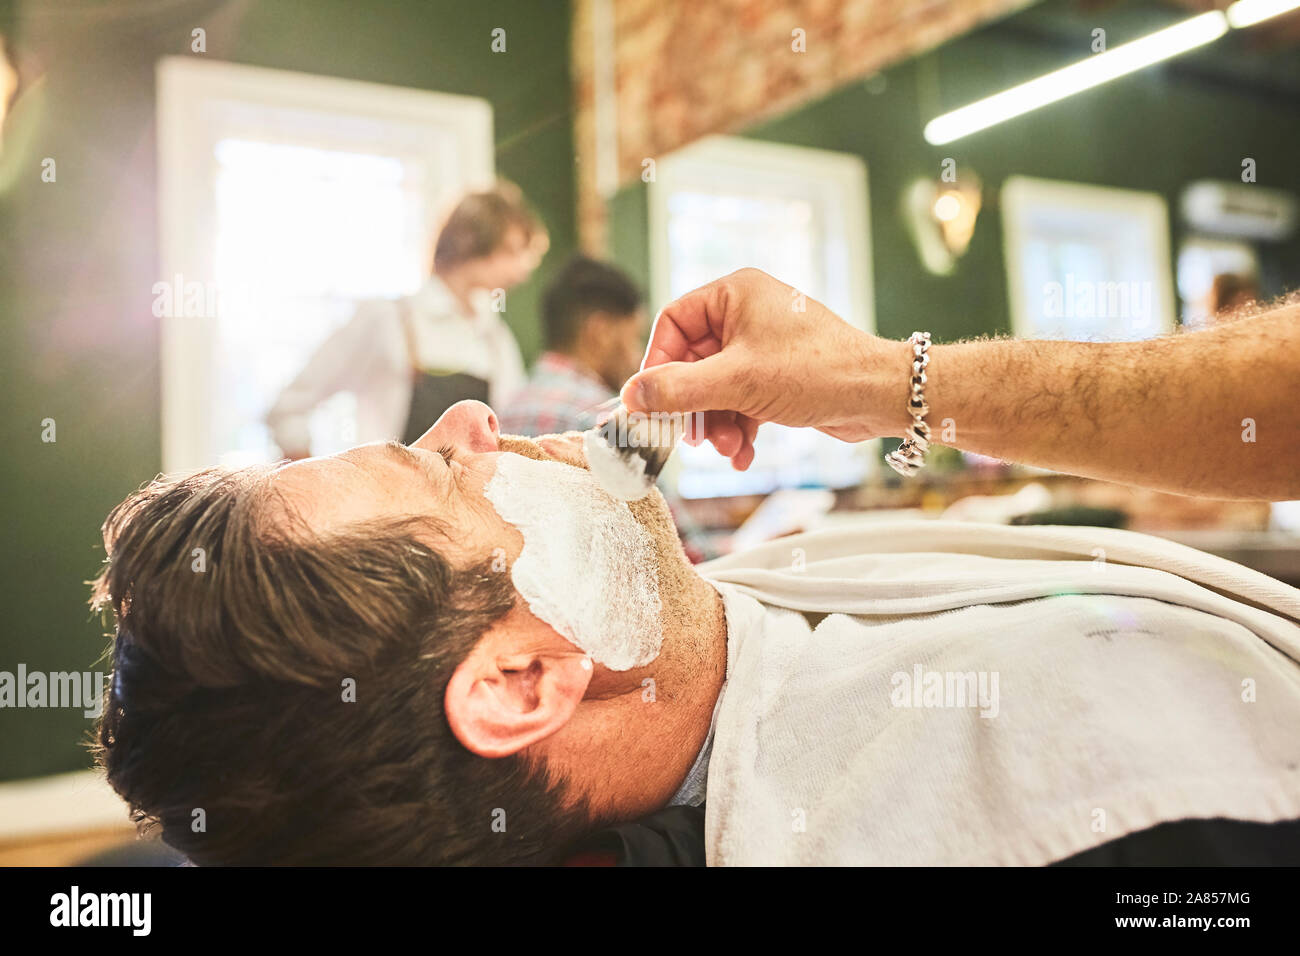 Man getting a shave at barbershop Stock Photo